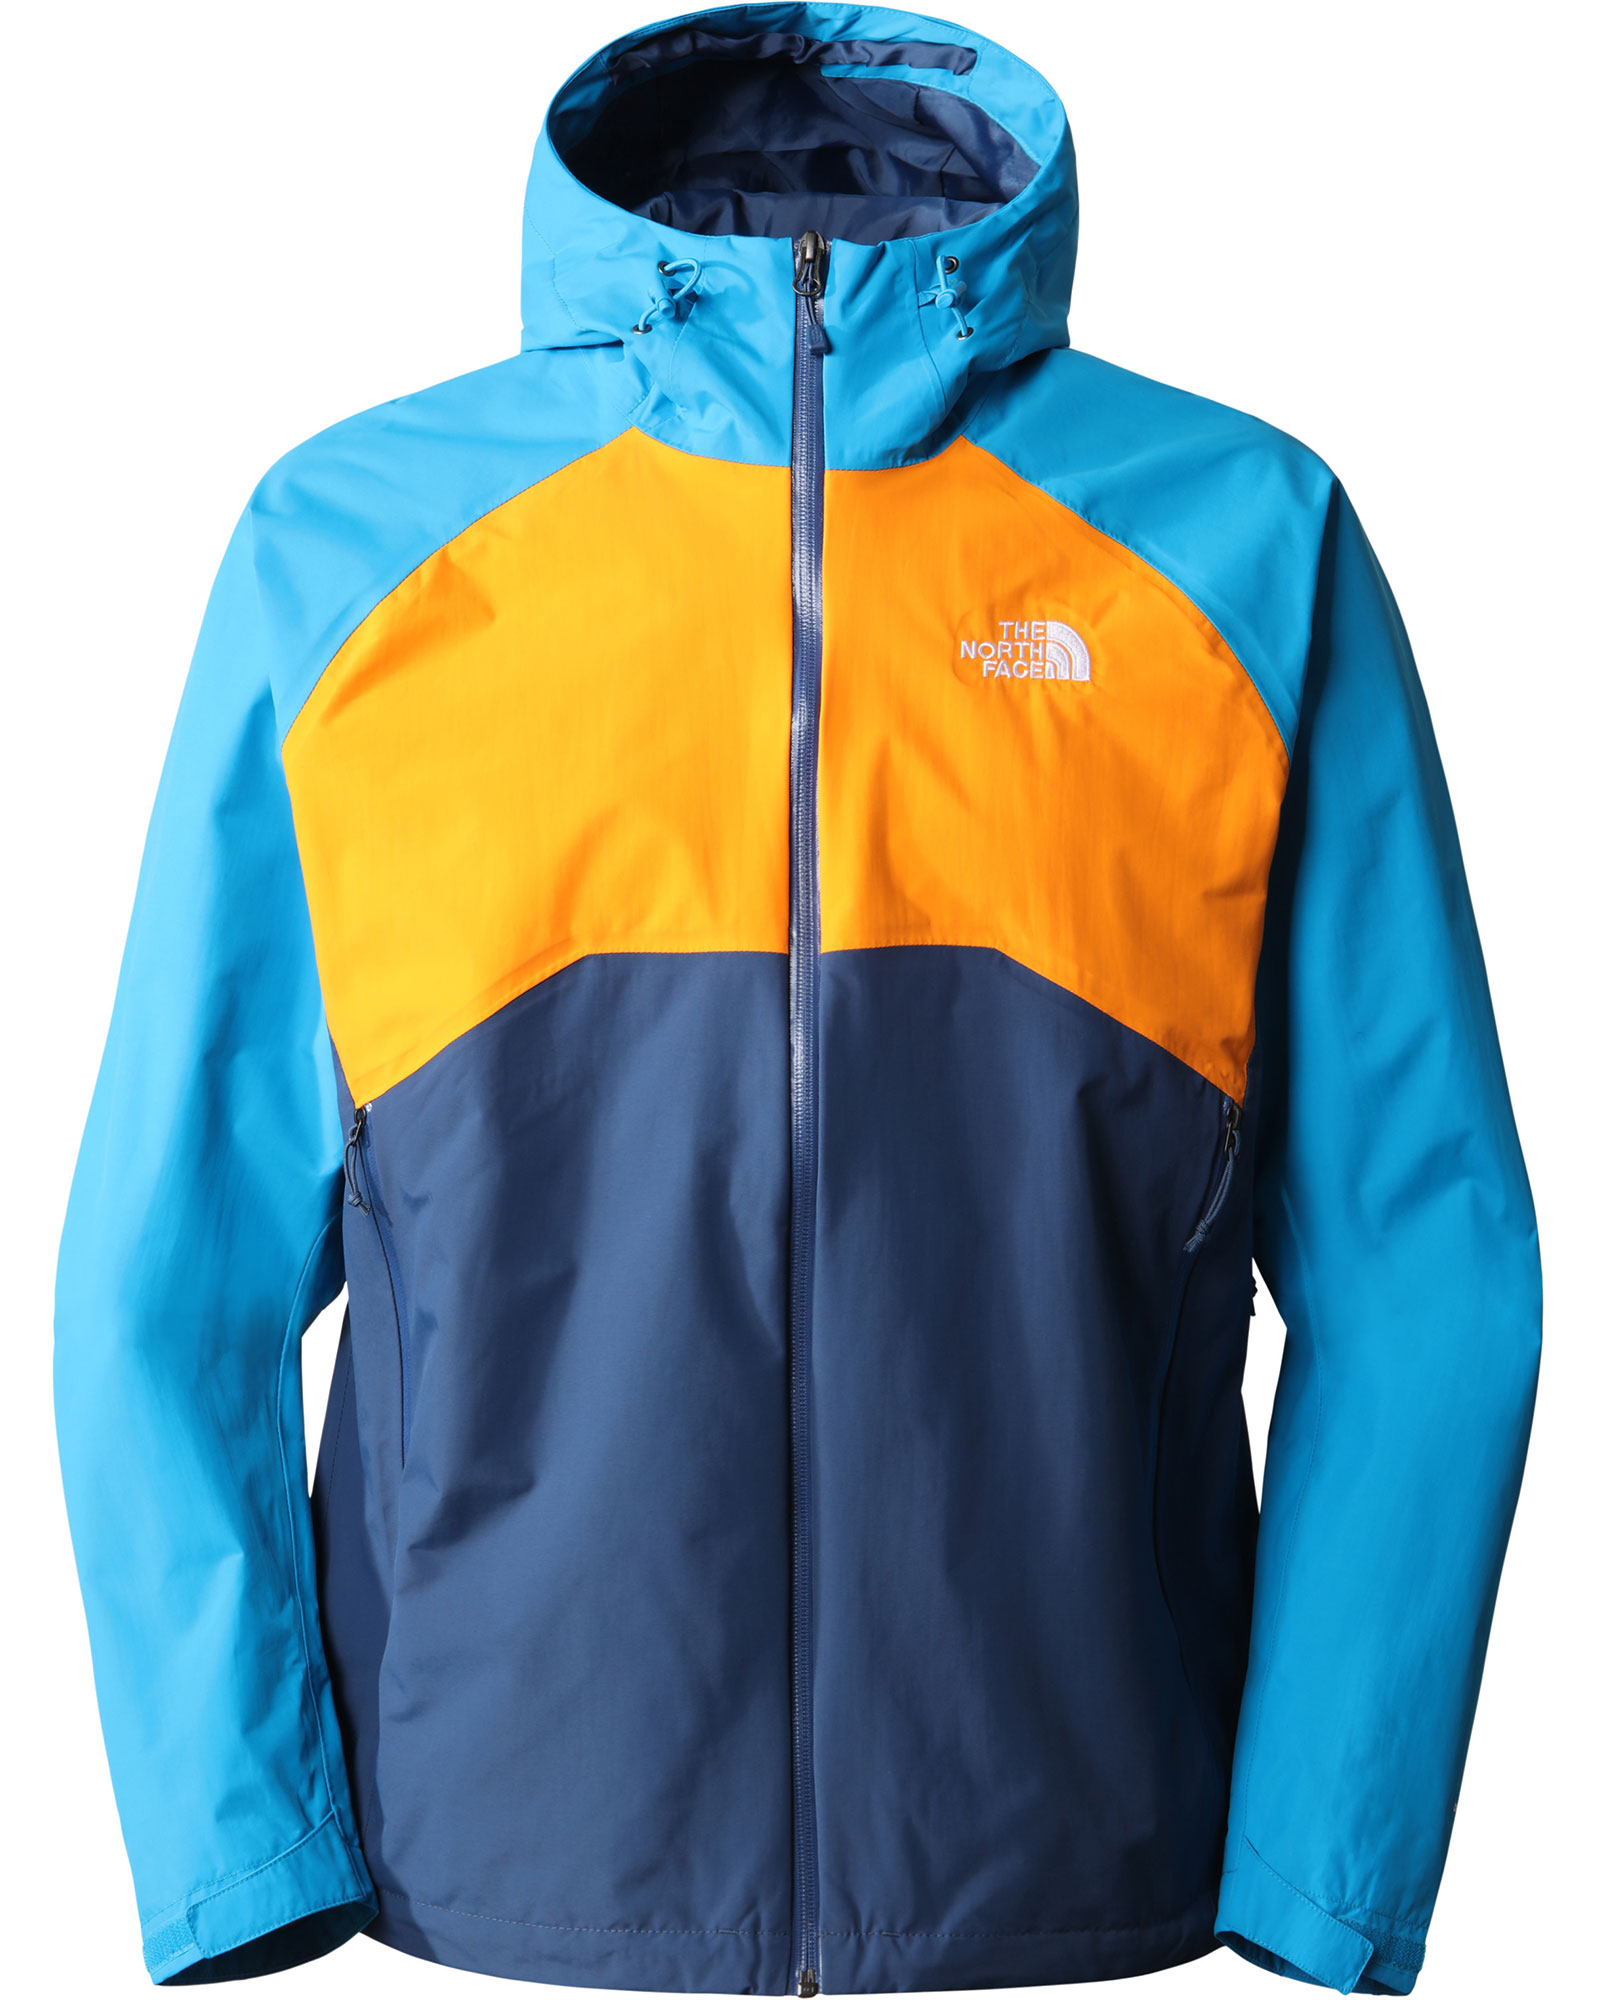 The North Face Stratos DryVent Men’s Jacket - Shady Blue/Cone Orange S